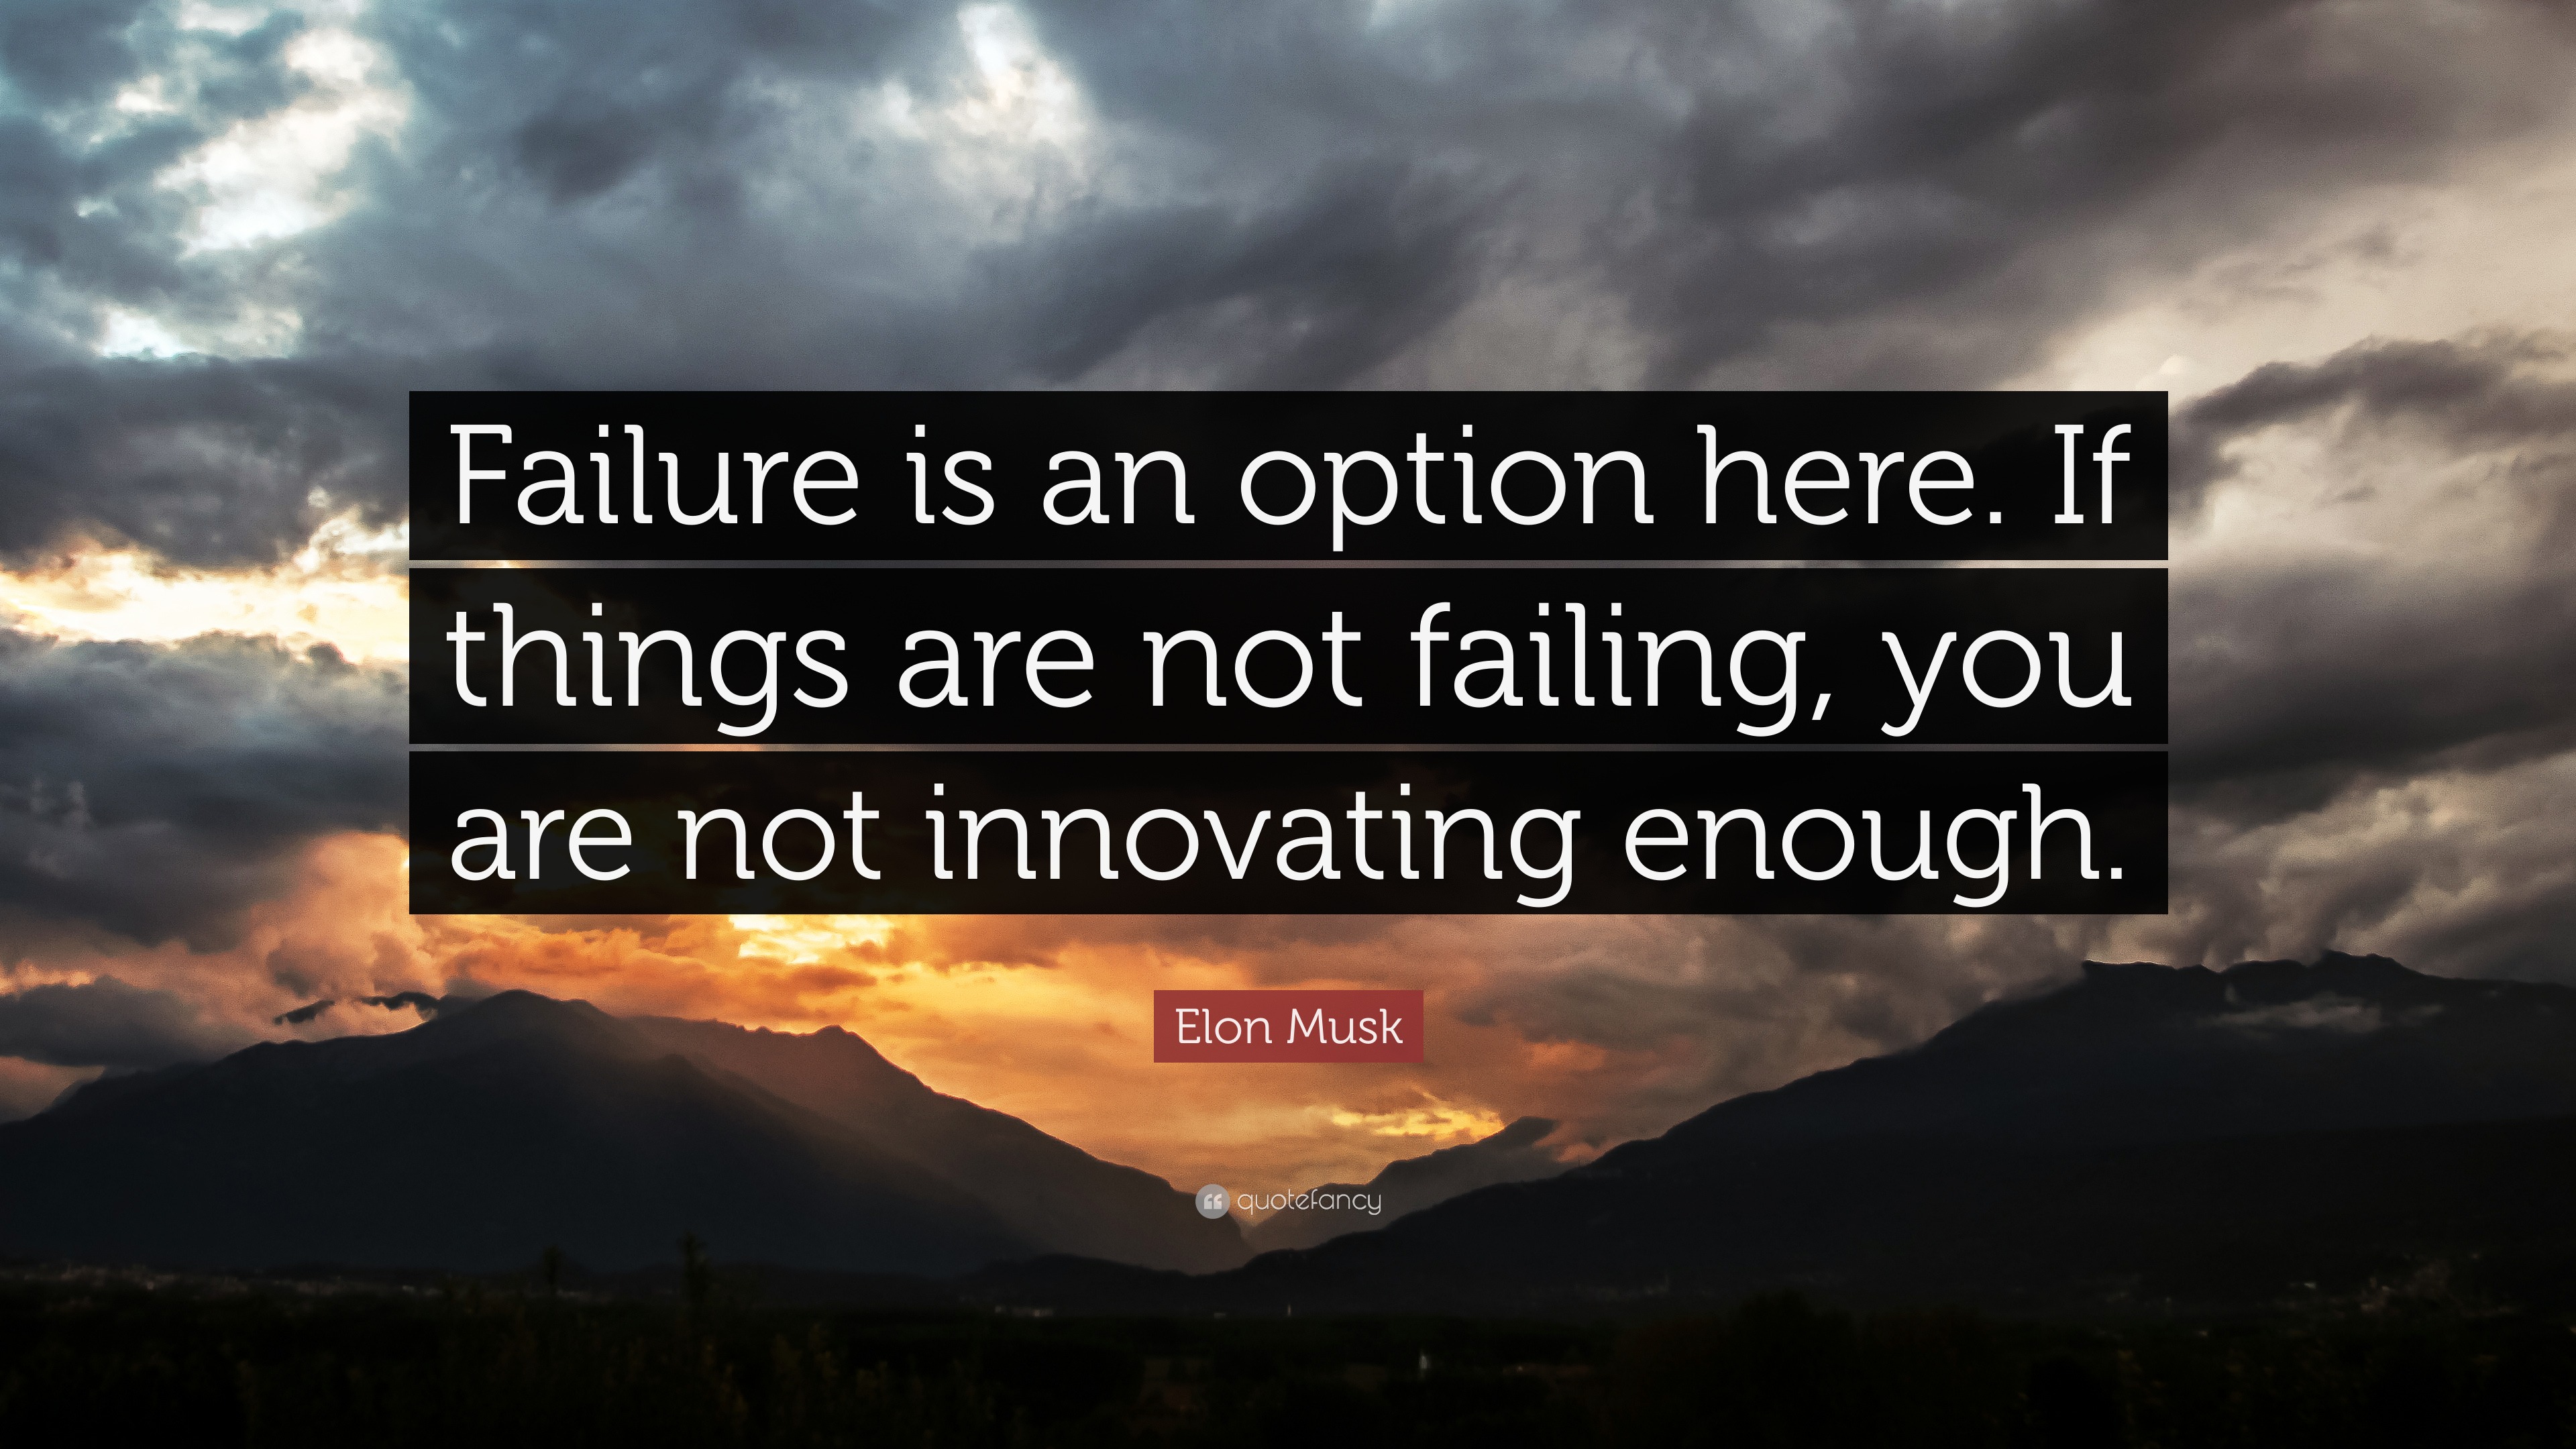 Elon Musk Quote: "Failure is an option here. If things are not failing, you are not innovating ...